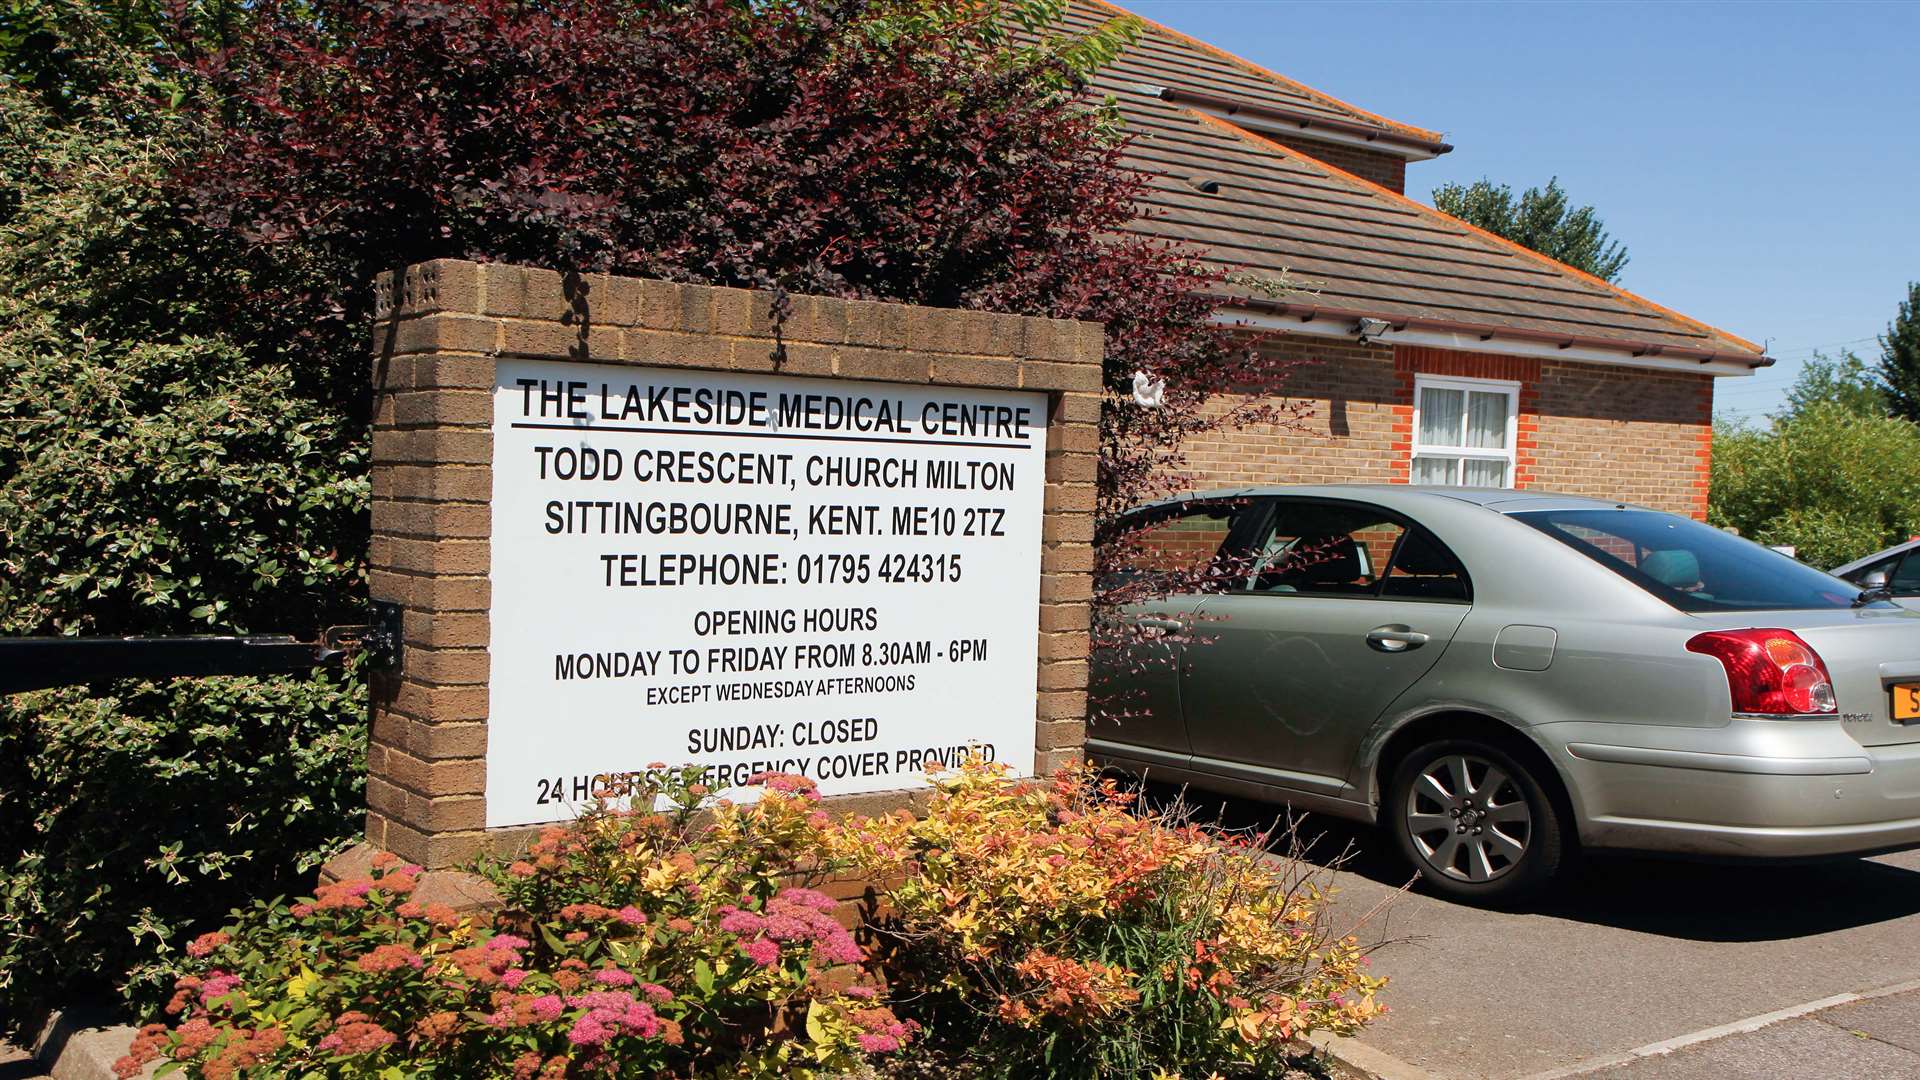 The Lakeside Medical Centre in Milton Regis has officially reopened